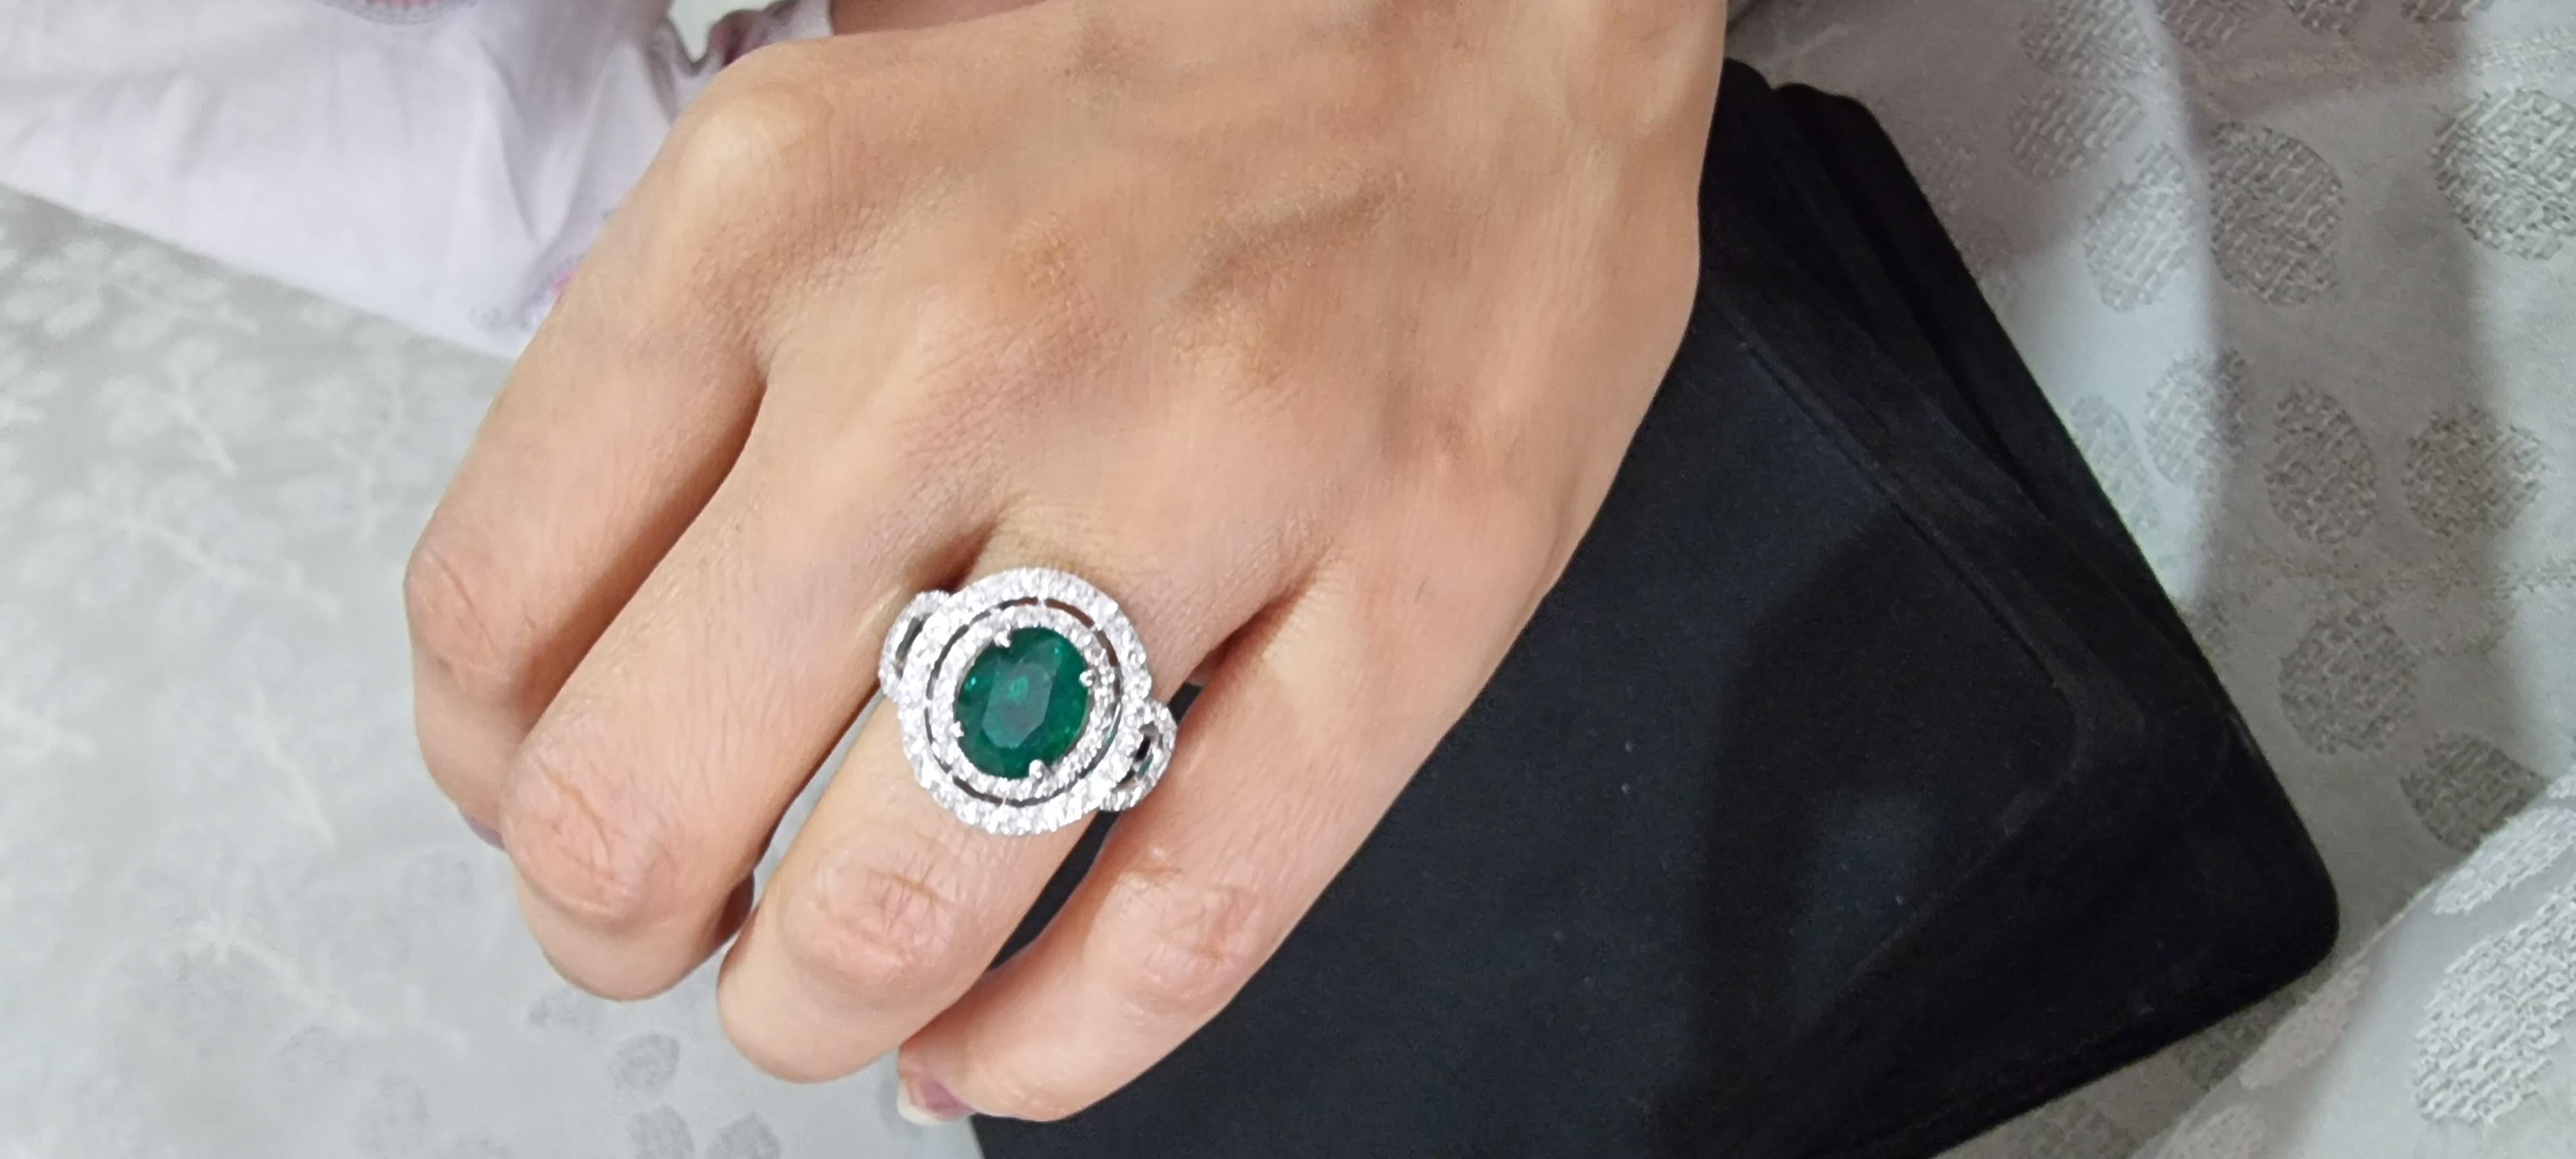 3.36cts Zambian Emerald Ring with 1.01cts Diamonds and 14k Gold For Sale 1